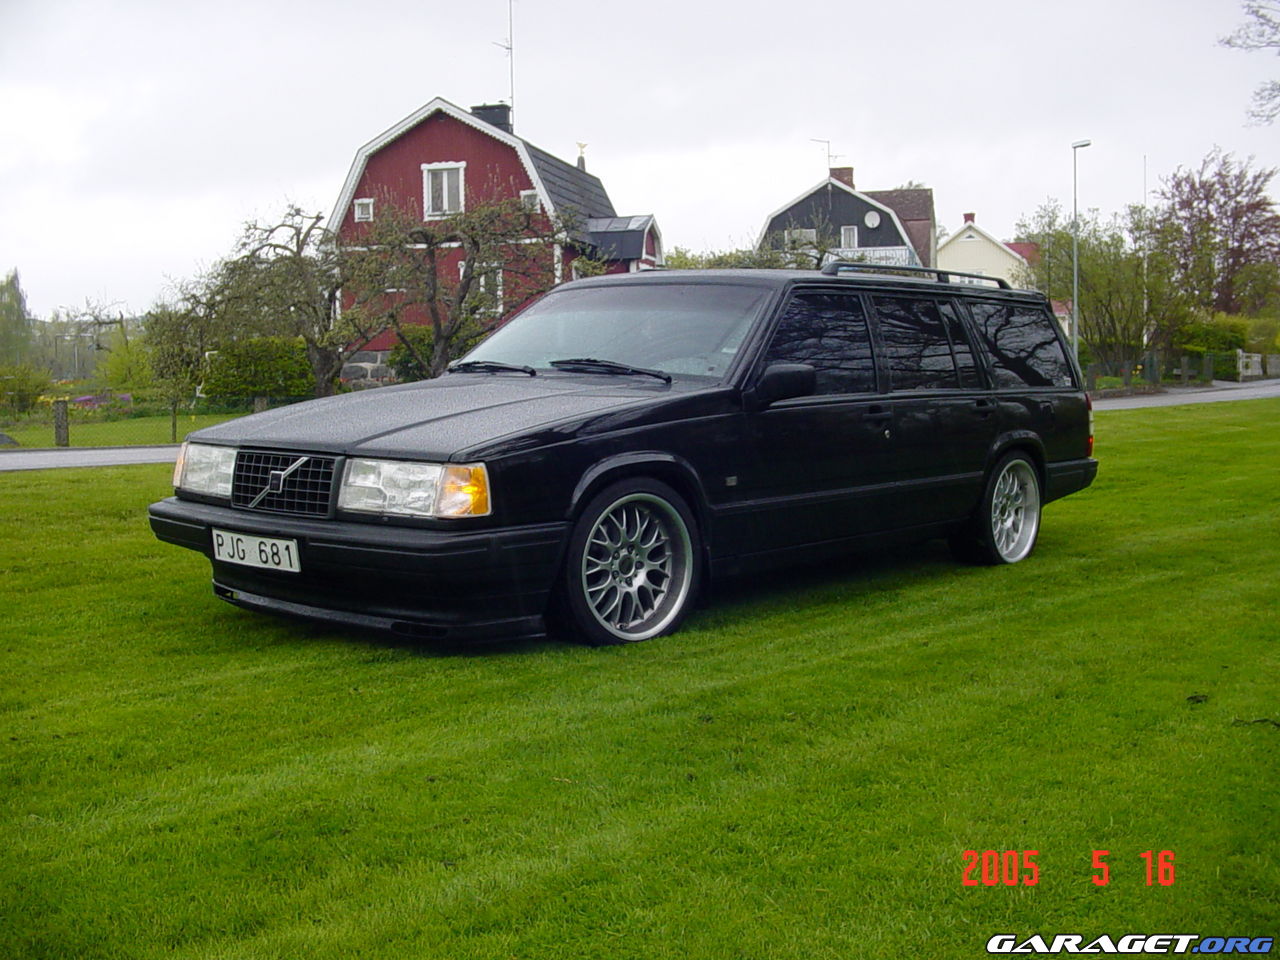 On this page we present you the most successful photo gallery of Volvo 945